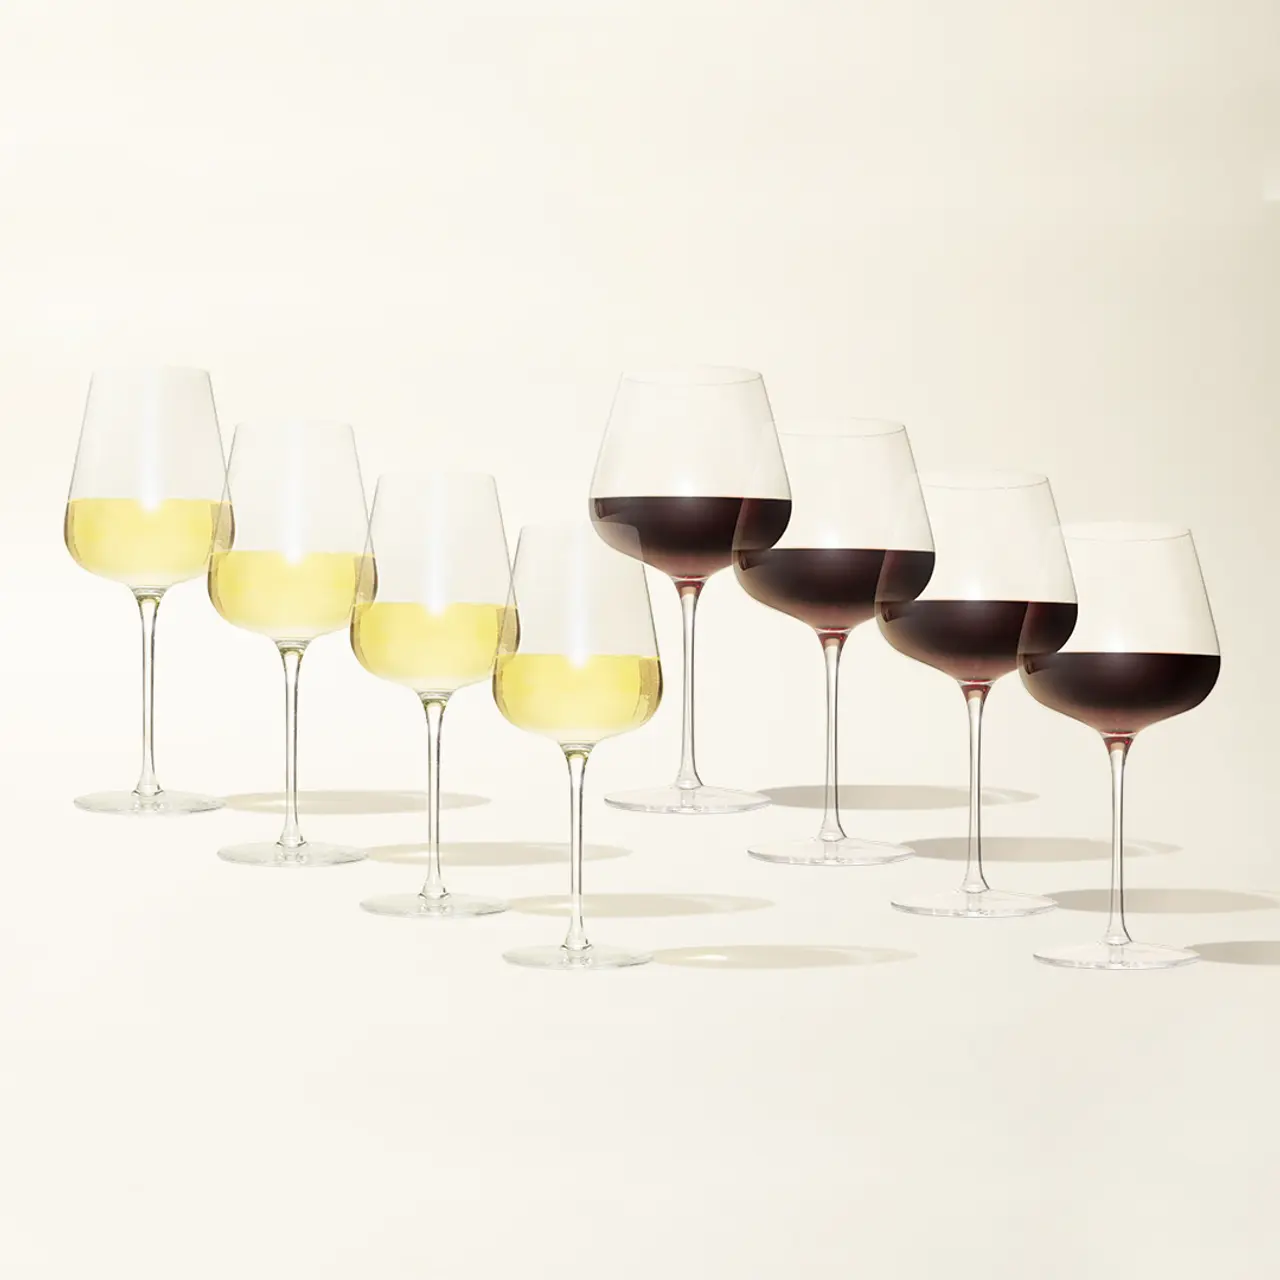 Seven wine glasses in a row, with the first three containing white wine and the last four containing red wine, on a light background.